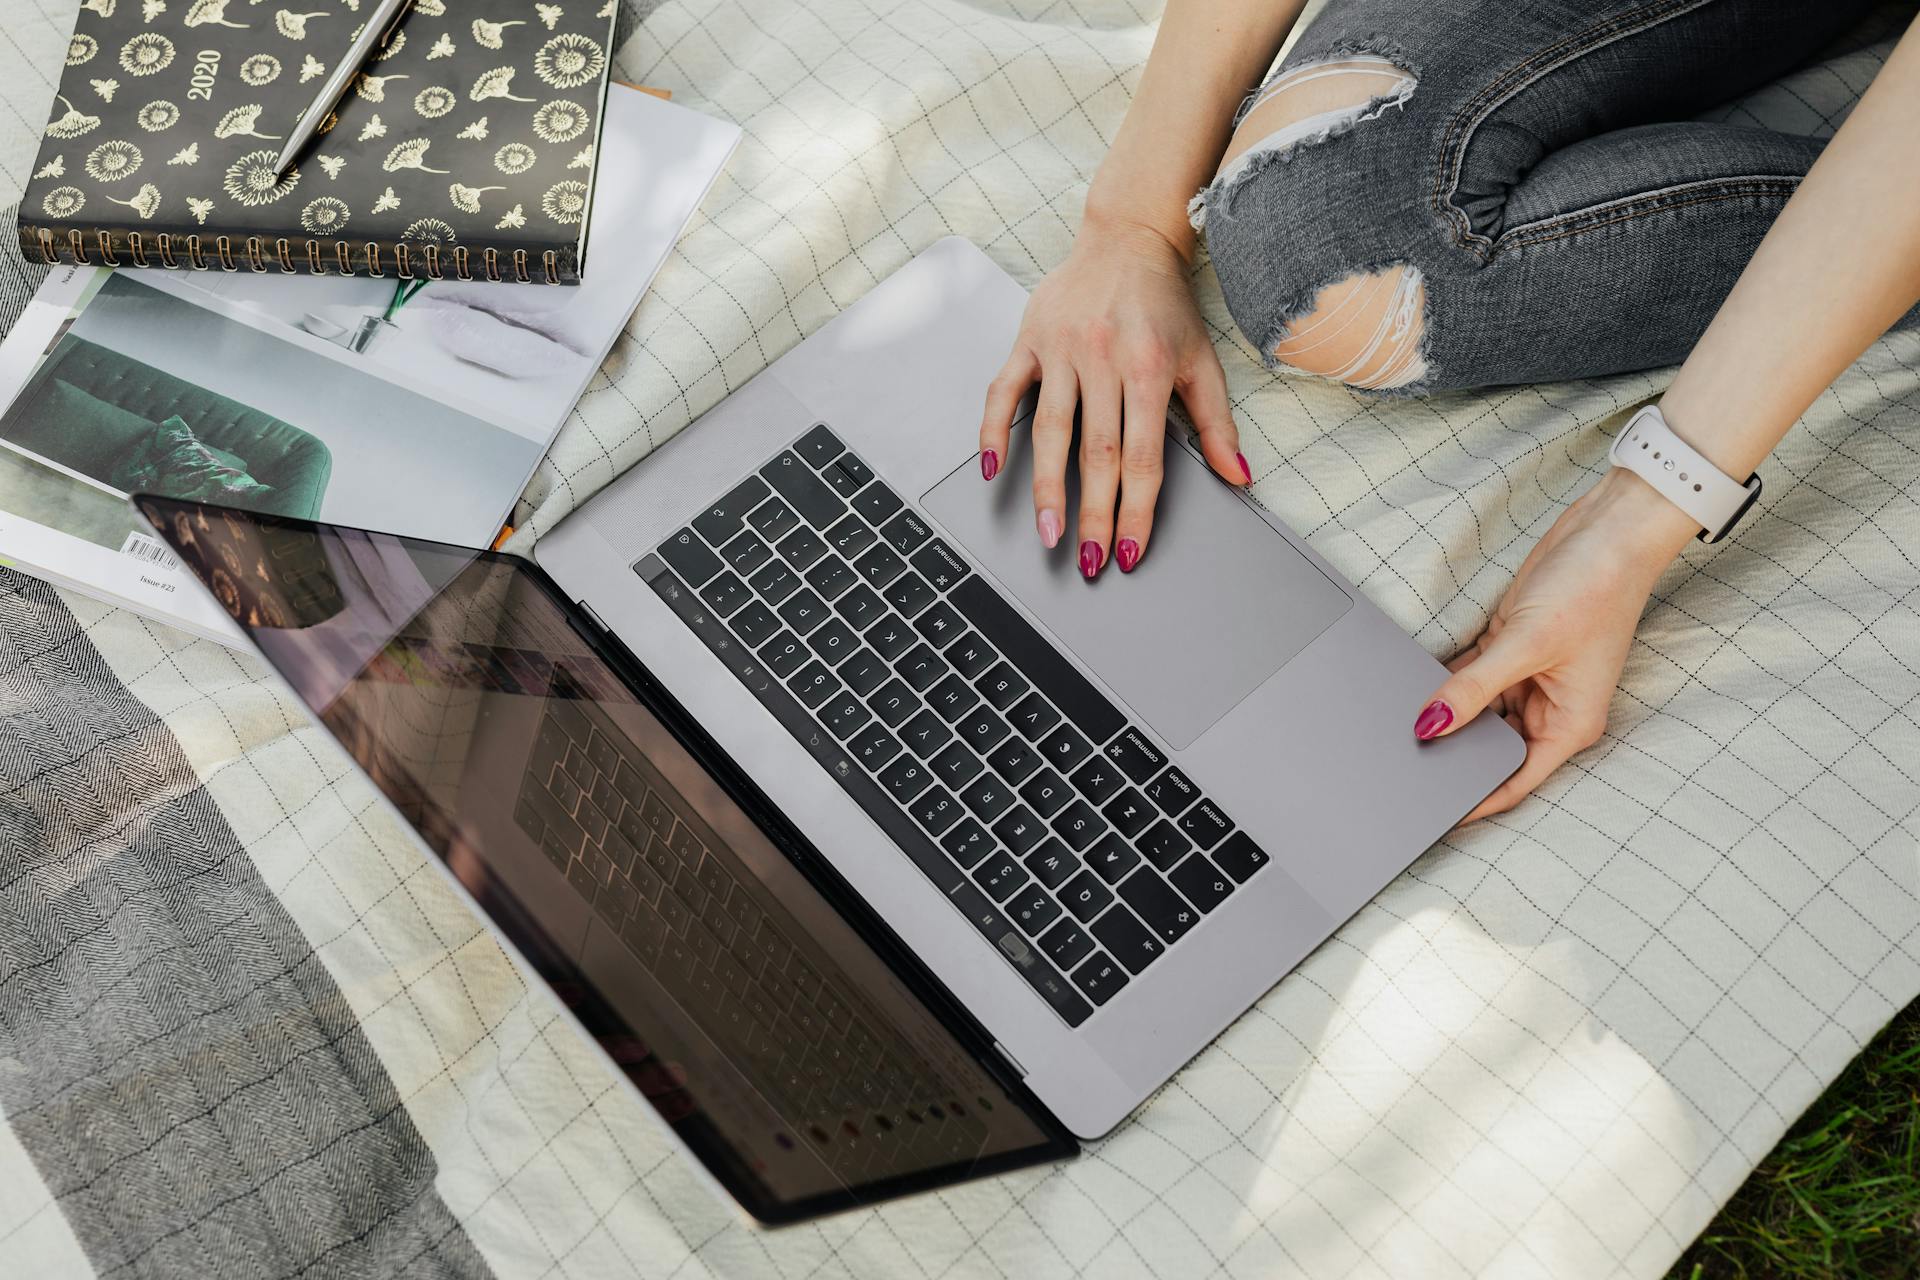 A person using a laptop | Source: Pexels